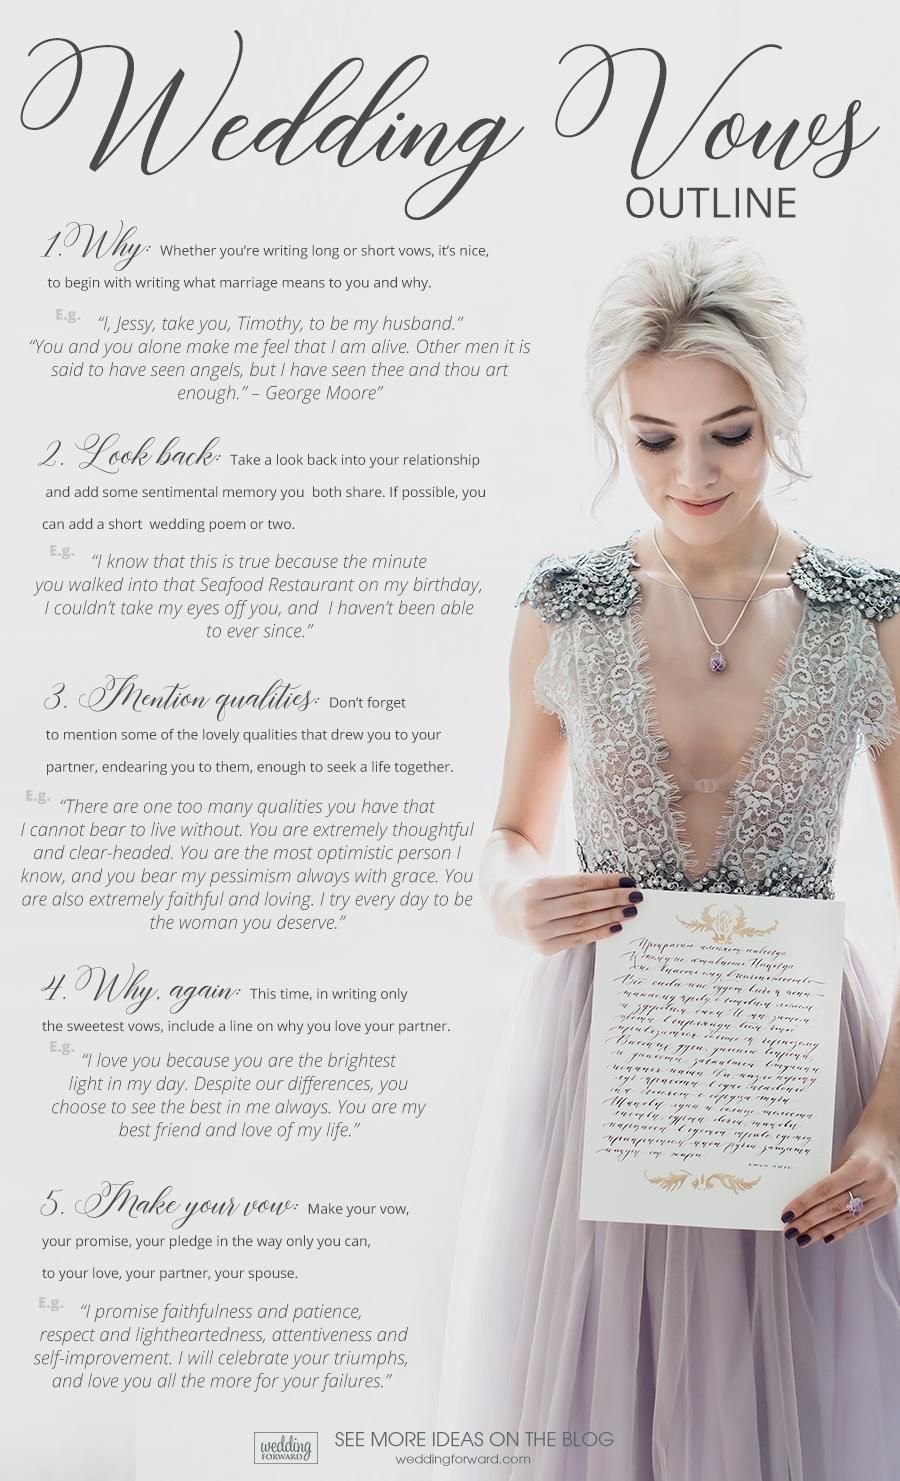 59 Wedding Vows For Her: Examples And Outline | Wedding Forward -   17 wedding Vows diy ideas